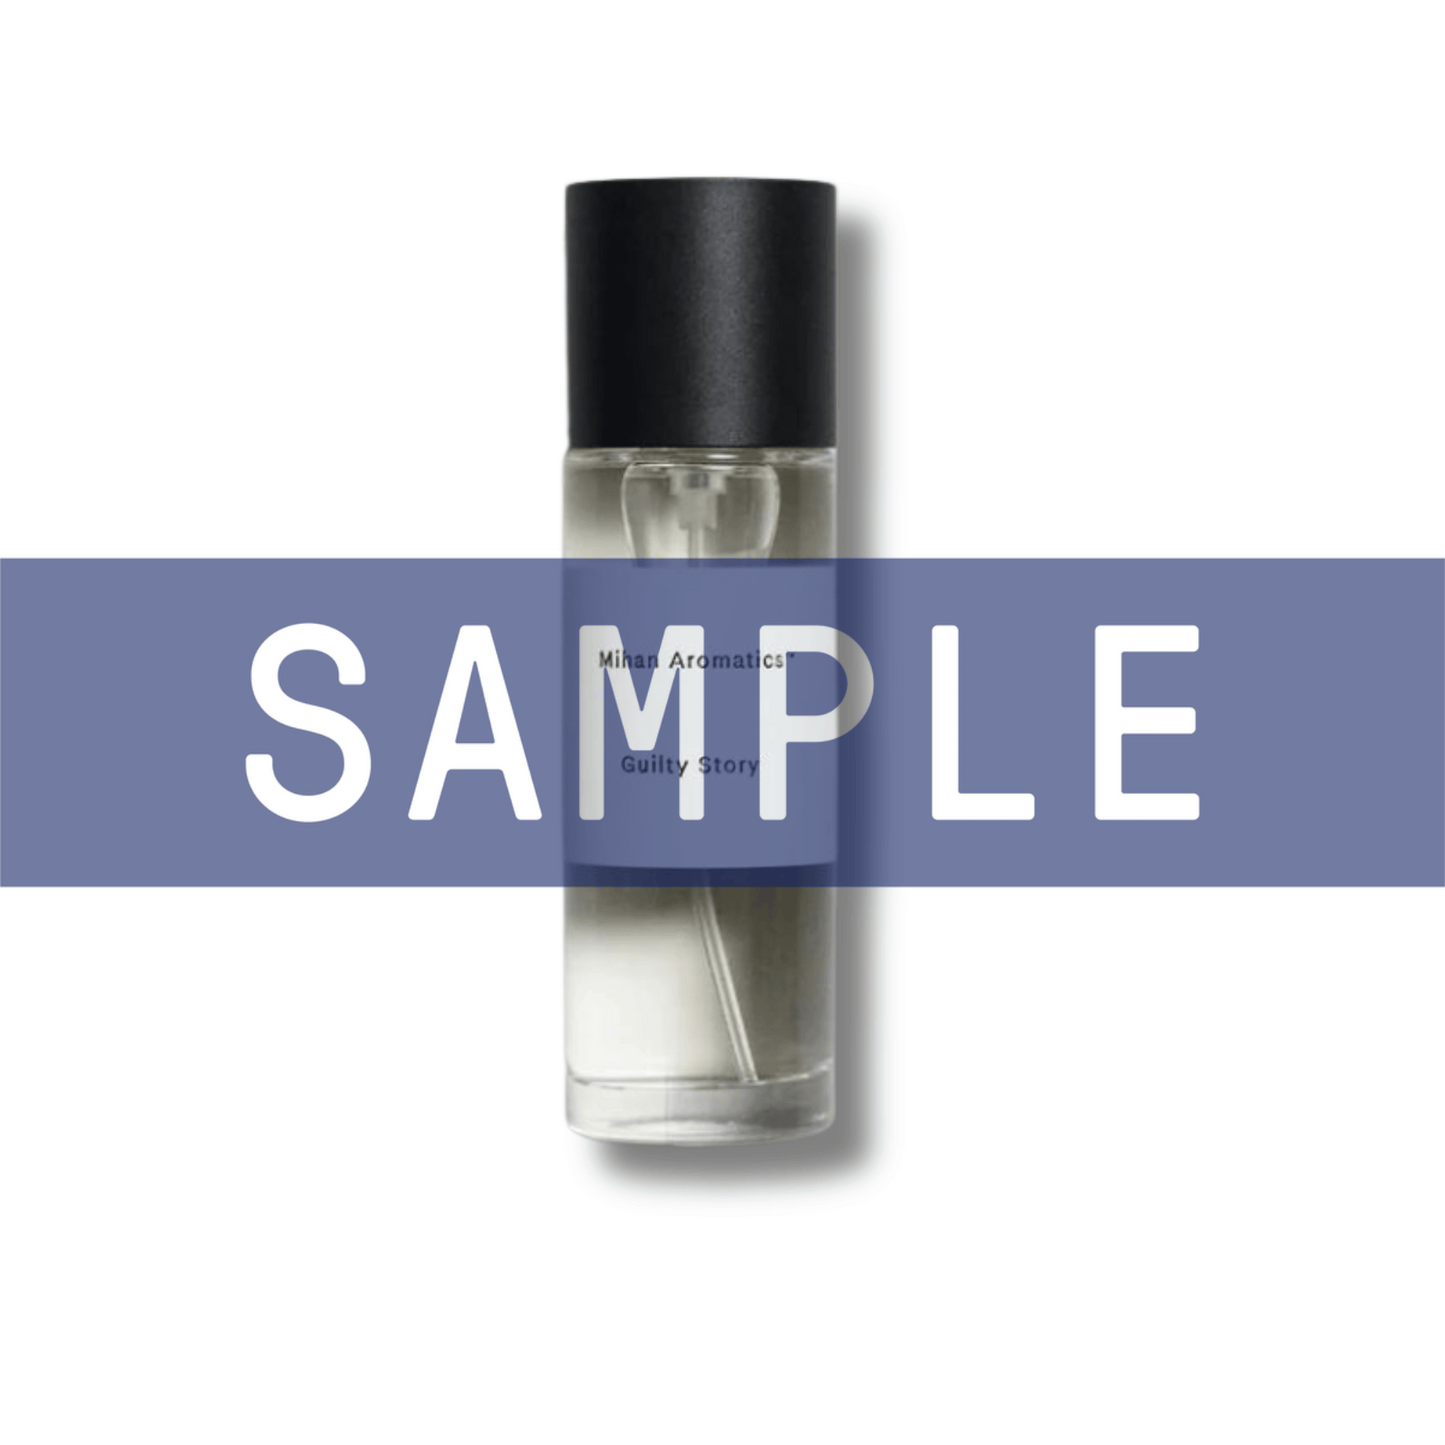 Primary Image of Sample - Guilty Story EDP